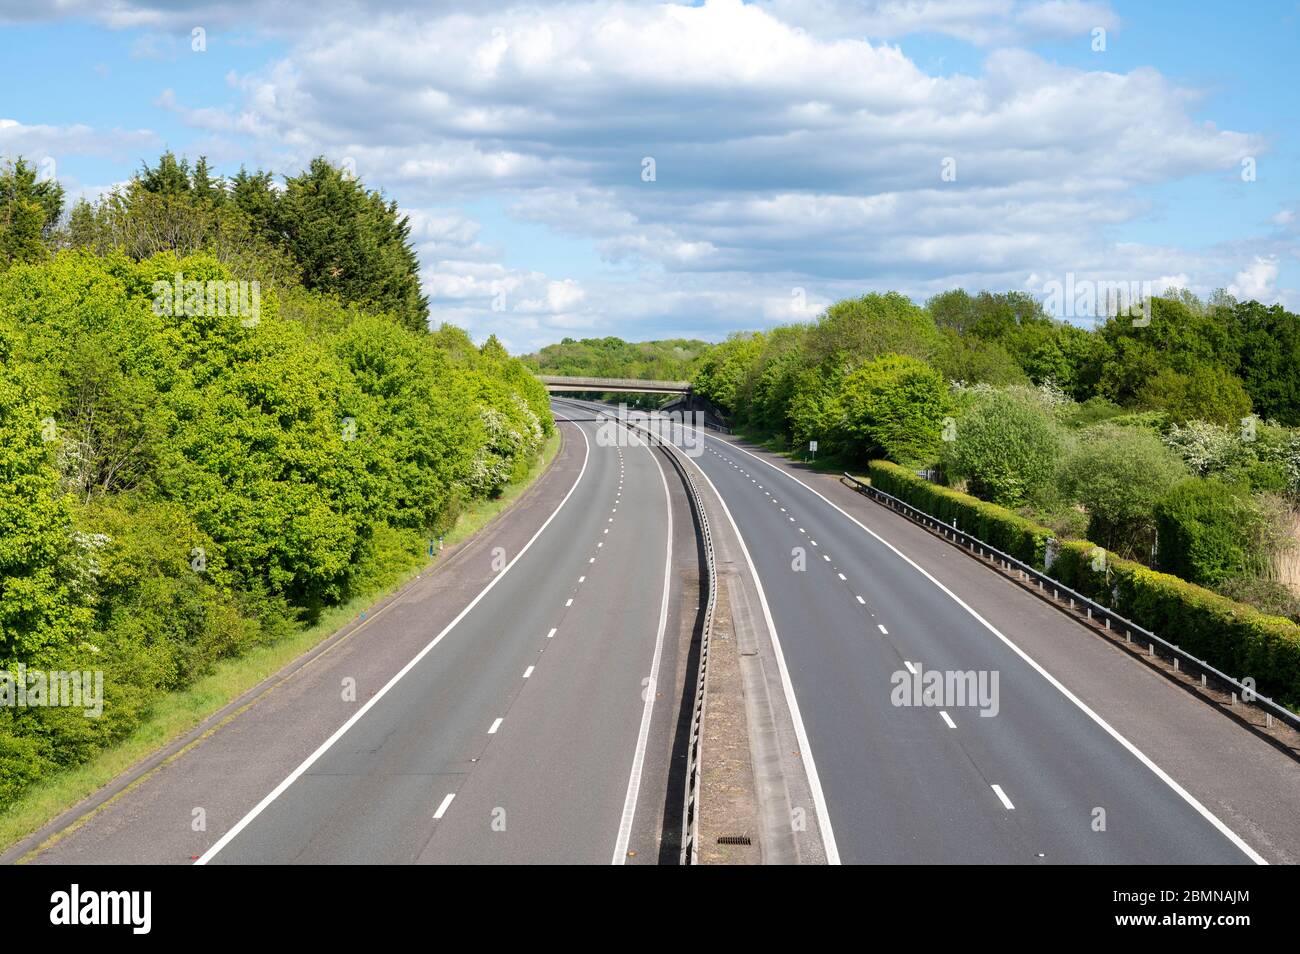 Clear motorway has no traffice in both directions. Stock Photo